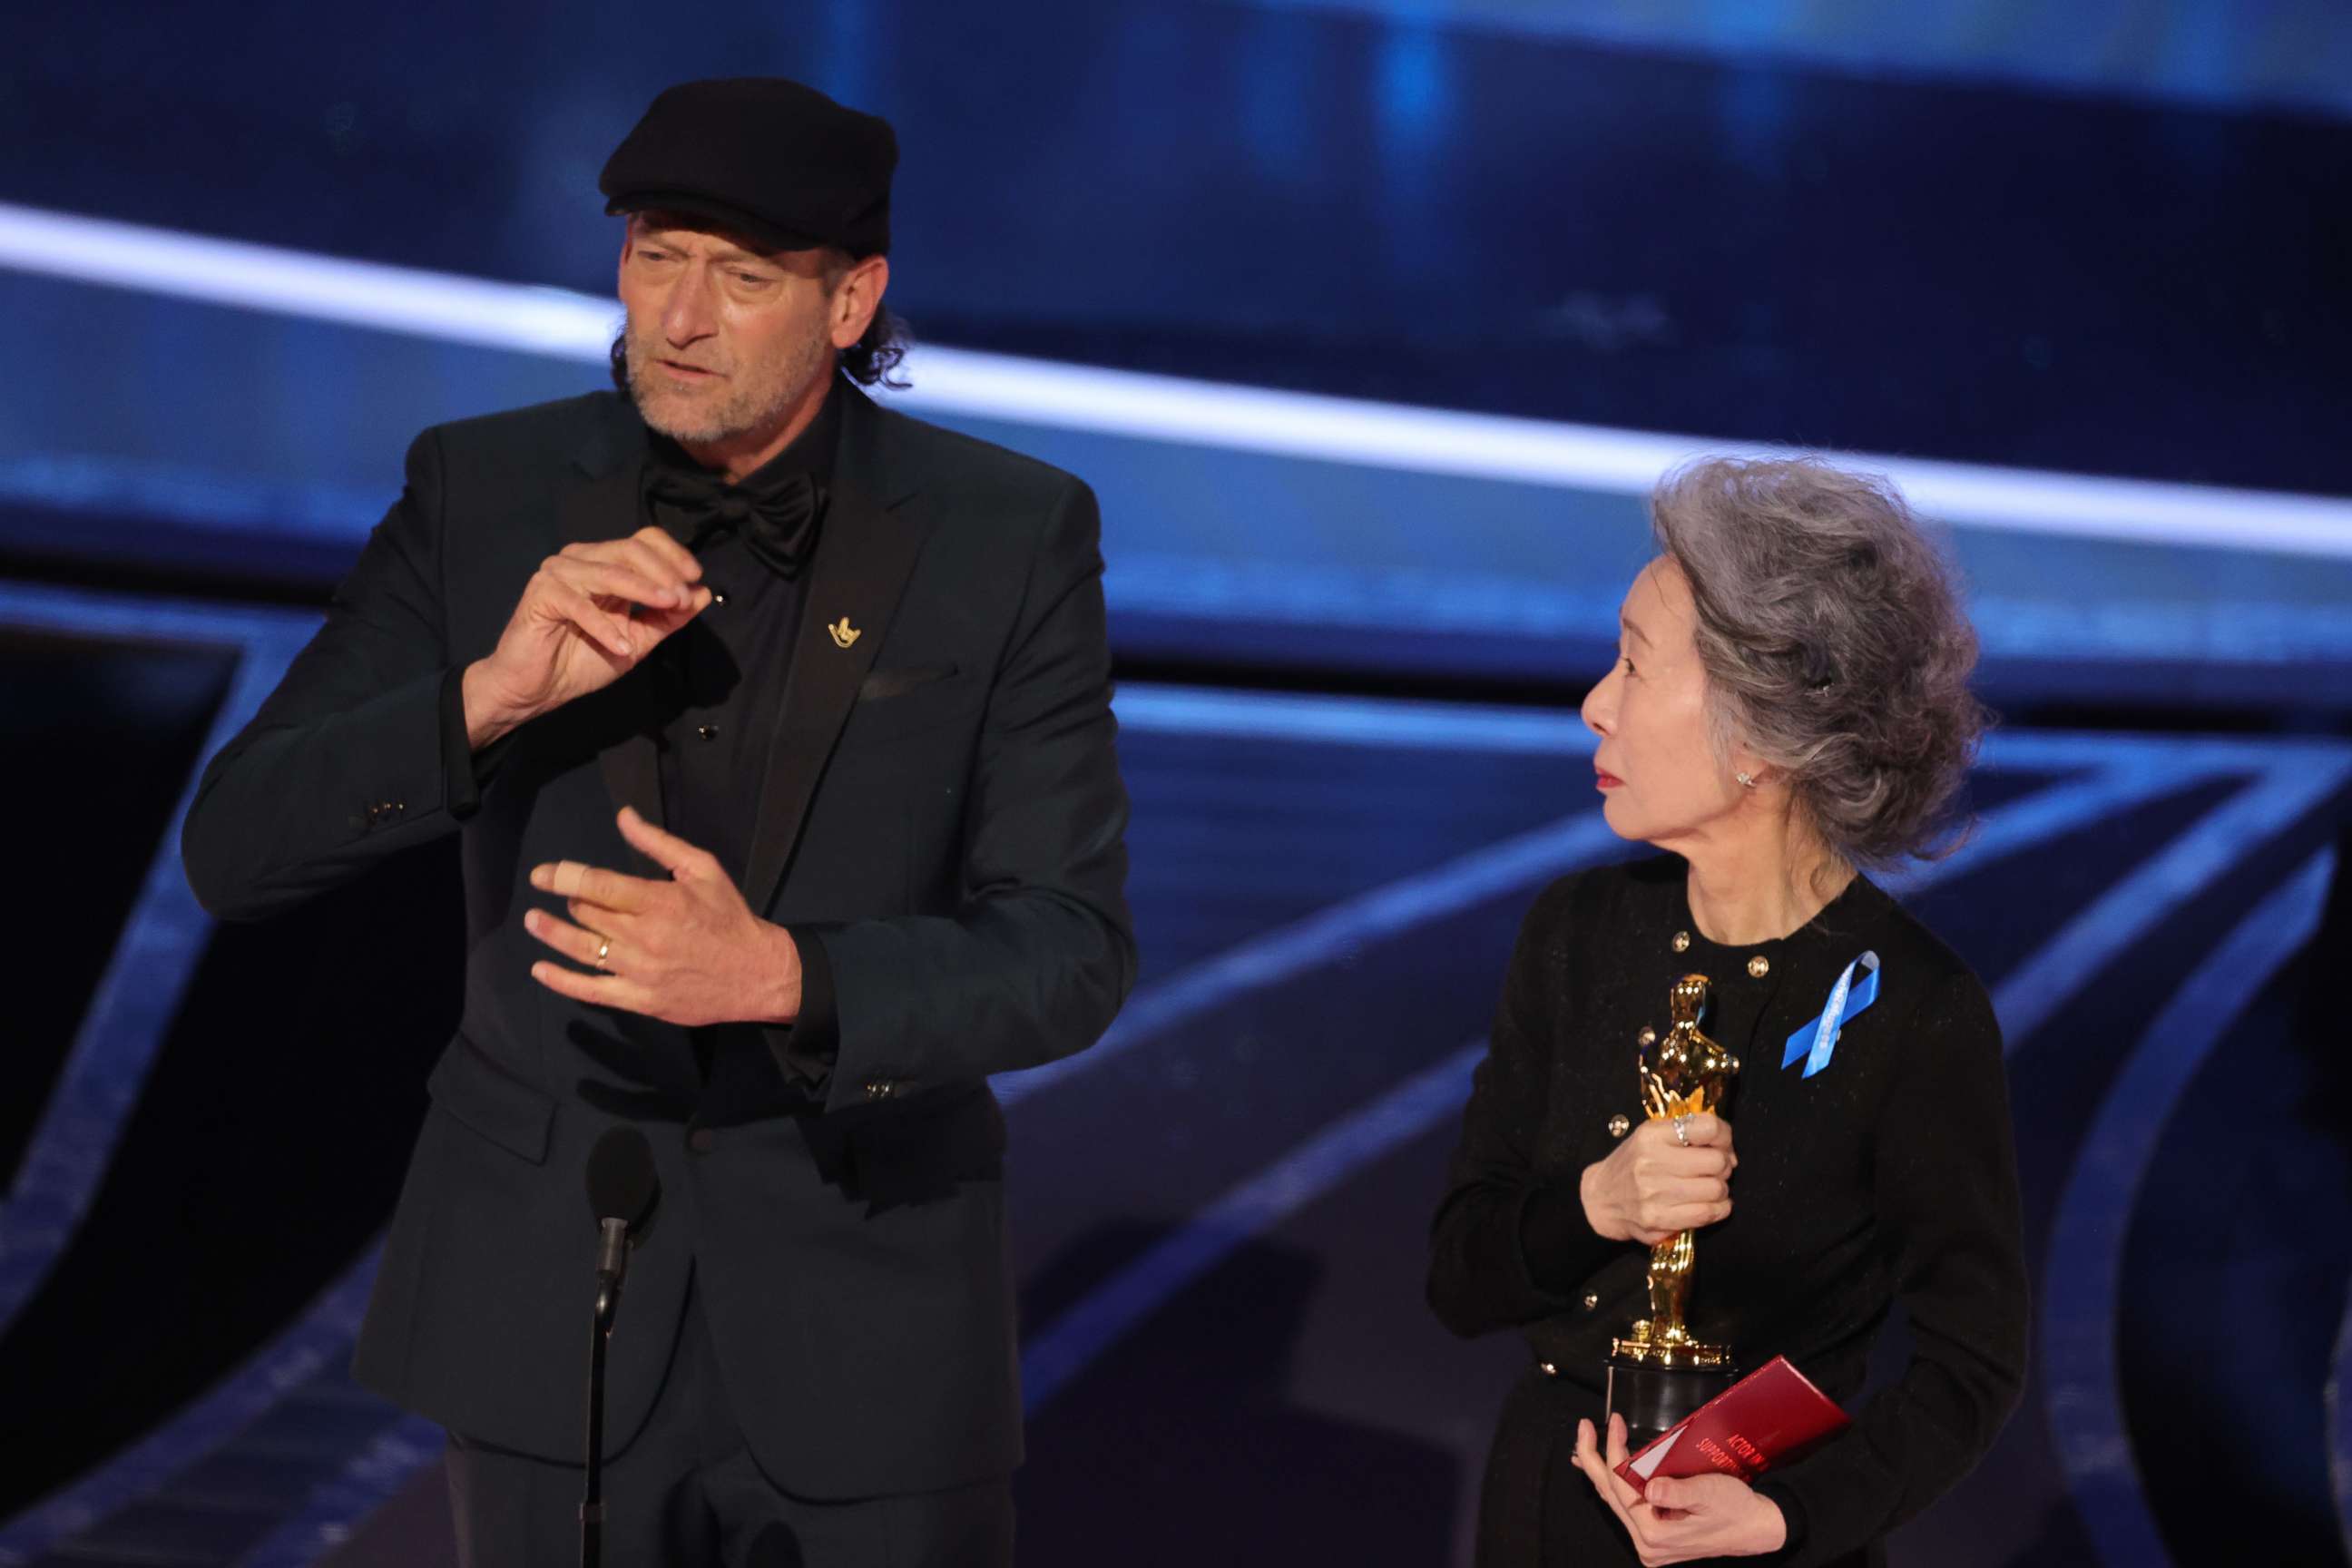 PHOTO: Troy Kotsur accepts the Actor in a Supporting Role award for "CODA" from Youn Yuh-jung onstage during the 94th Annual Academy Awards at Dolby Theatre on March 27, 2022 in Hollywood, Calif.